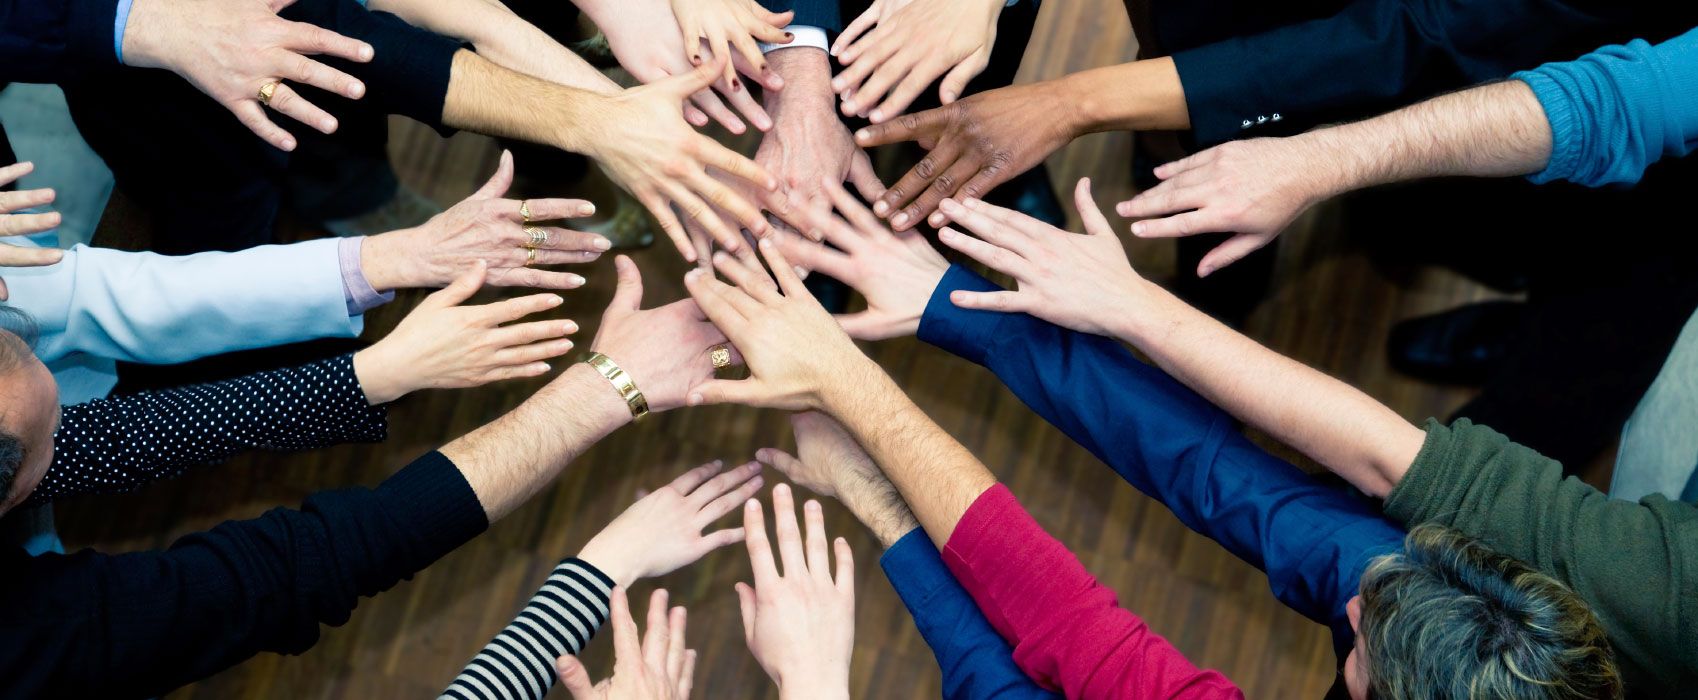 A group of hands coming together in the centre